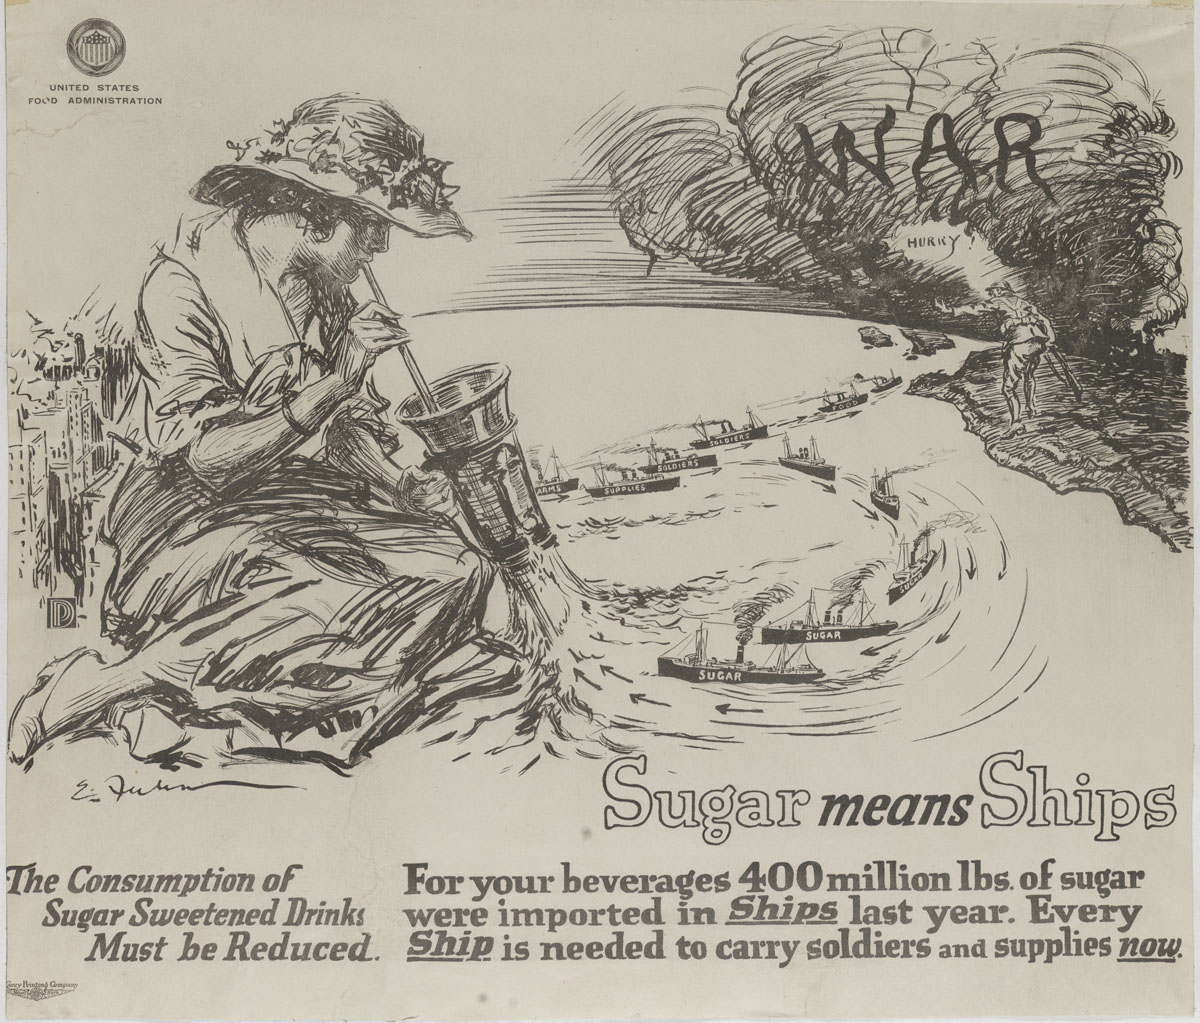 Ernest Fuhr, Sugar Means Ships (New York, 1917). Lithograph.